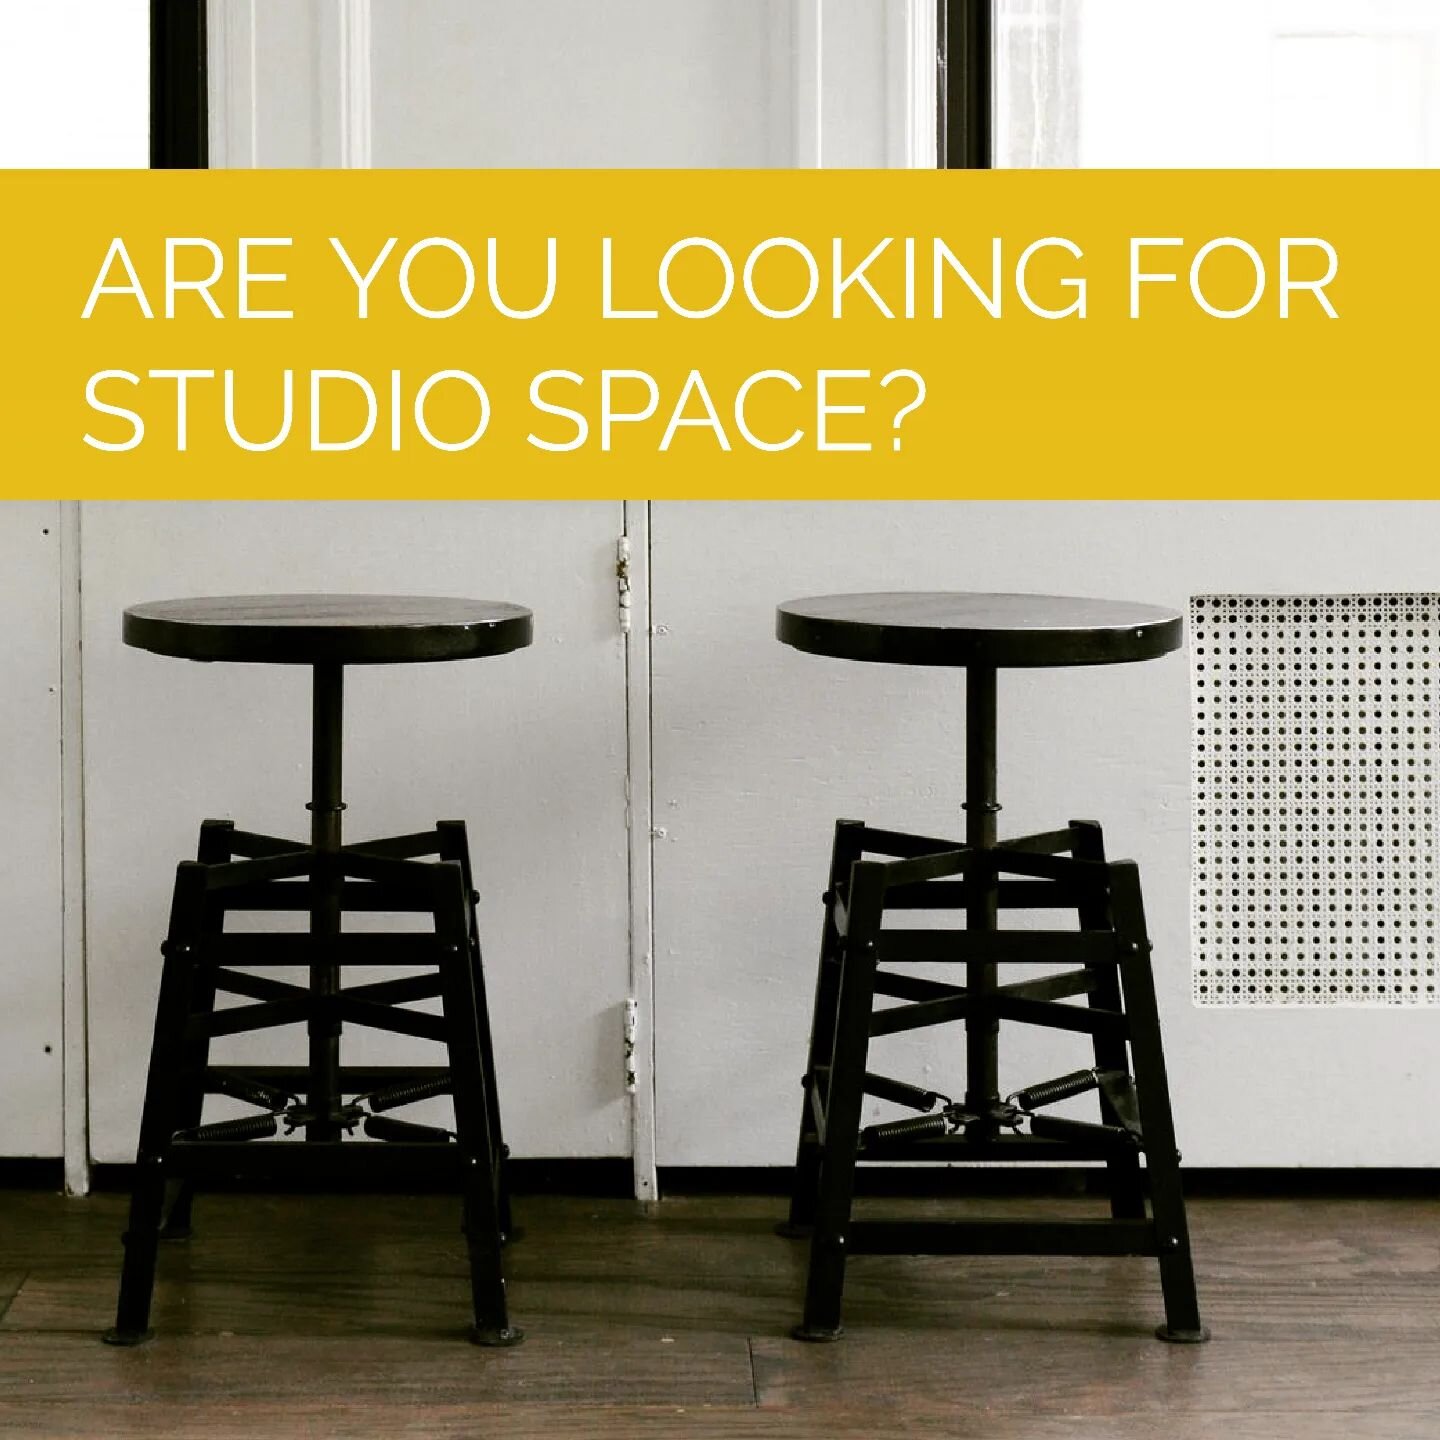 Are you a proffesional creative looking for a studio space in Oxfordshire? Please do get in touch to arrange to visit and find out more.

E:ayreshousestudios@gmail.com
www.ayreshousestudios.co.uk 

#studios #artistsstudios #makersspace #opportunities